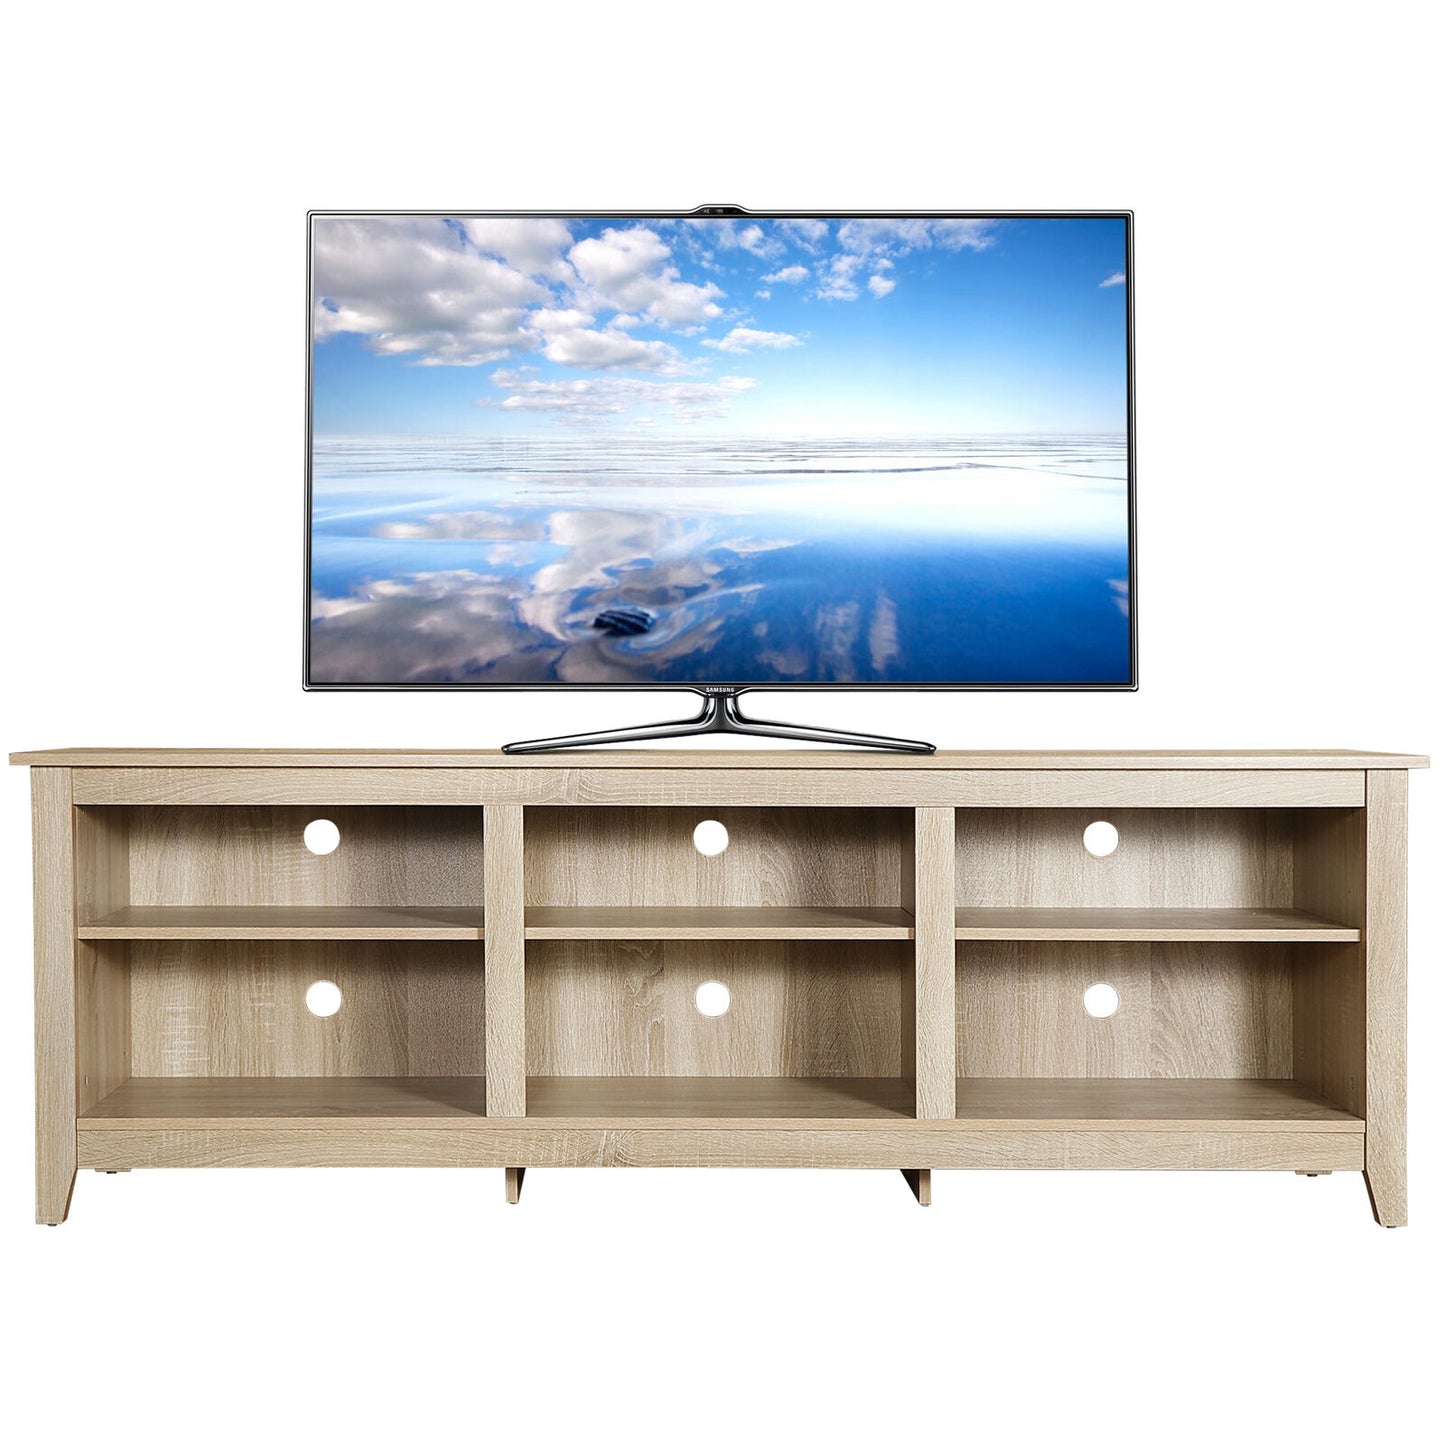 Classic 6 Cubby TV Stand for TVs up to 80inch 70inch Storage Compartment wood